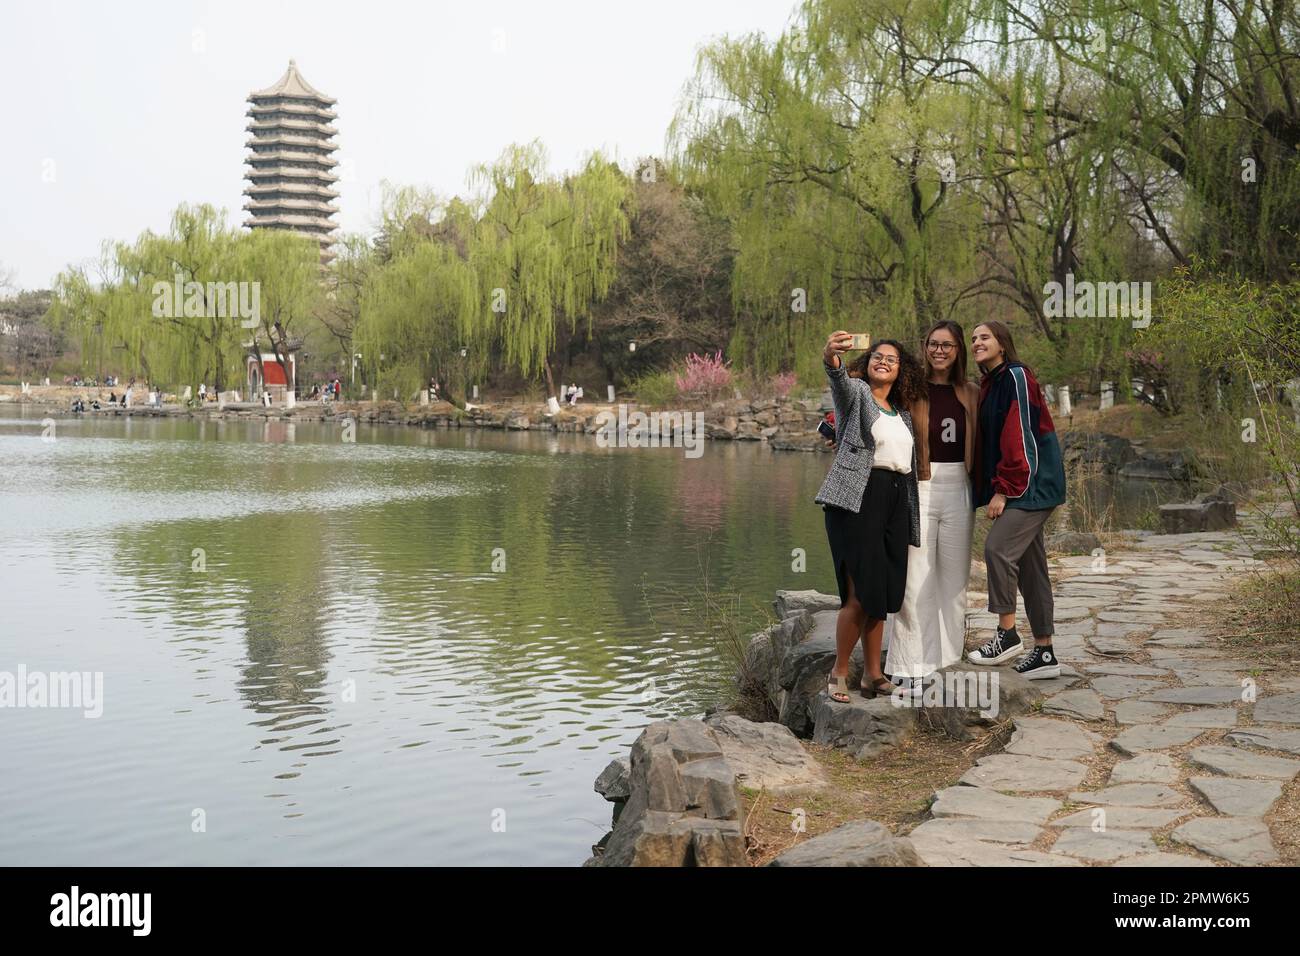 (230415) -- BEIJING, April 15, 2023 (Xinhua) -- Rafaela (L), Manuela (C) and Maria take a selfie near the Weiming Lake of Peking University in Beijing, capital of China, March 31, 2023. Maria Eduarda Variani, Rafaela Viana dos Santos, Manuela Boiteux Pestana, and Marco Andre Rocha Germano are Brazilian students studying in the Master of China Studies program at the Yenching Academy of Peking University in China. The four of them have been interested in Chinese culture since they were young. After arriving in Beijing, they have been impressed by the Chinese capital's profound cultural herit Stock Photo